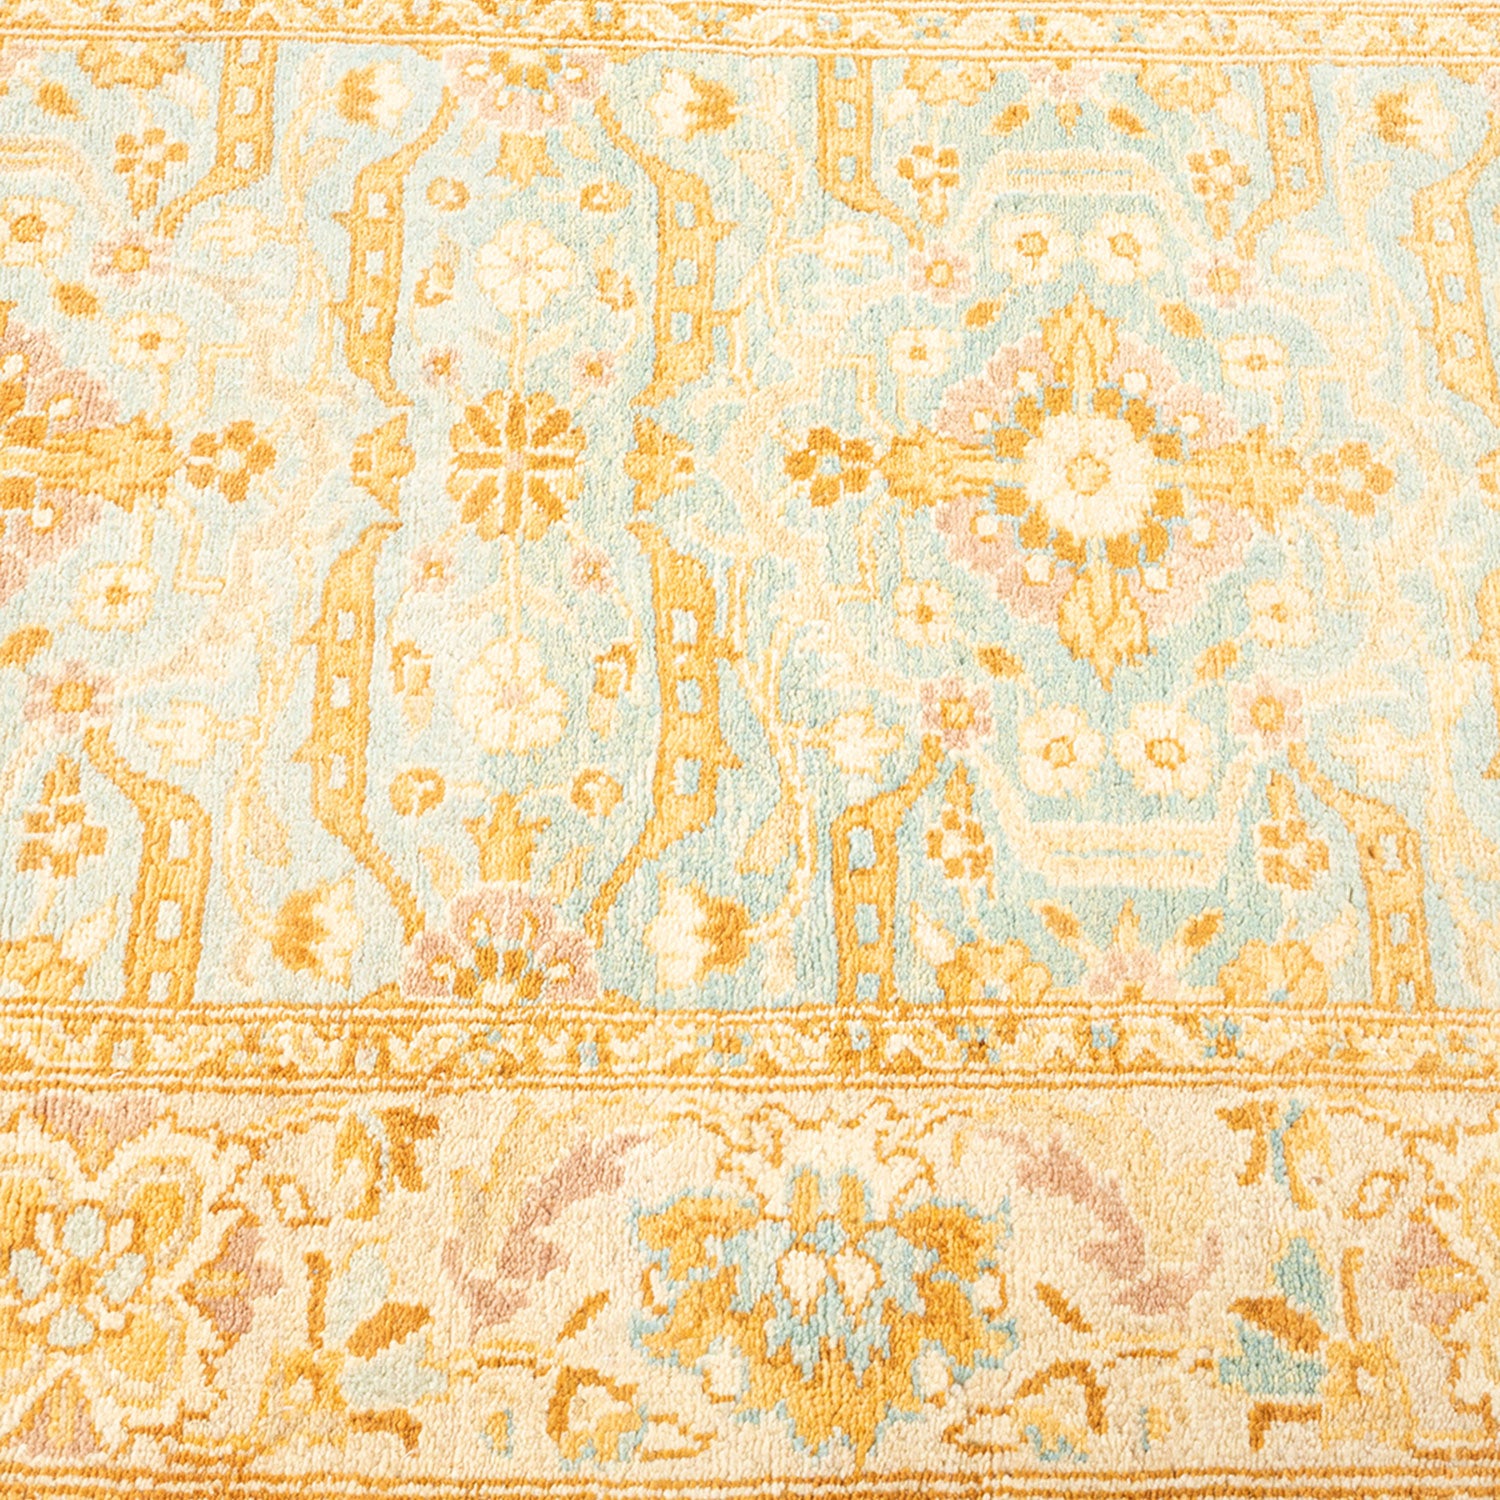 Close-up of a patterned carpet with intricate floral and geometric designs.